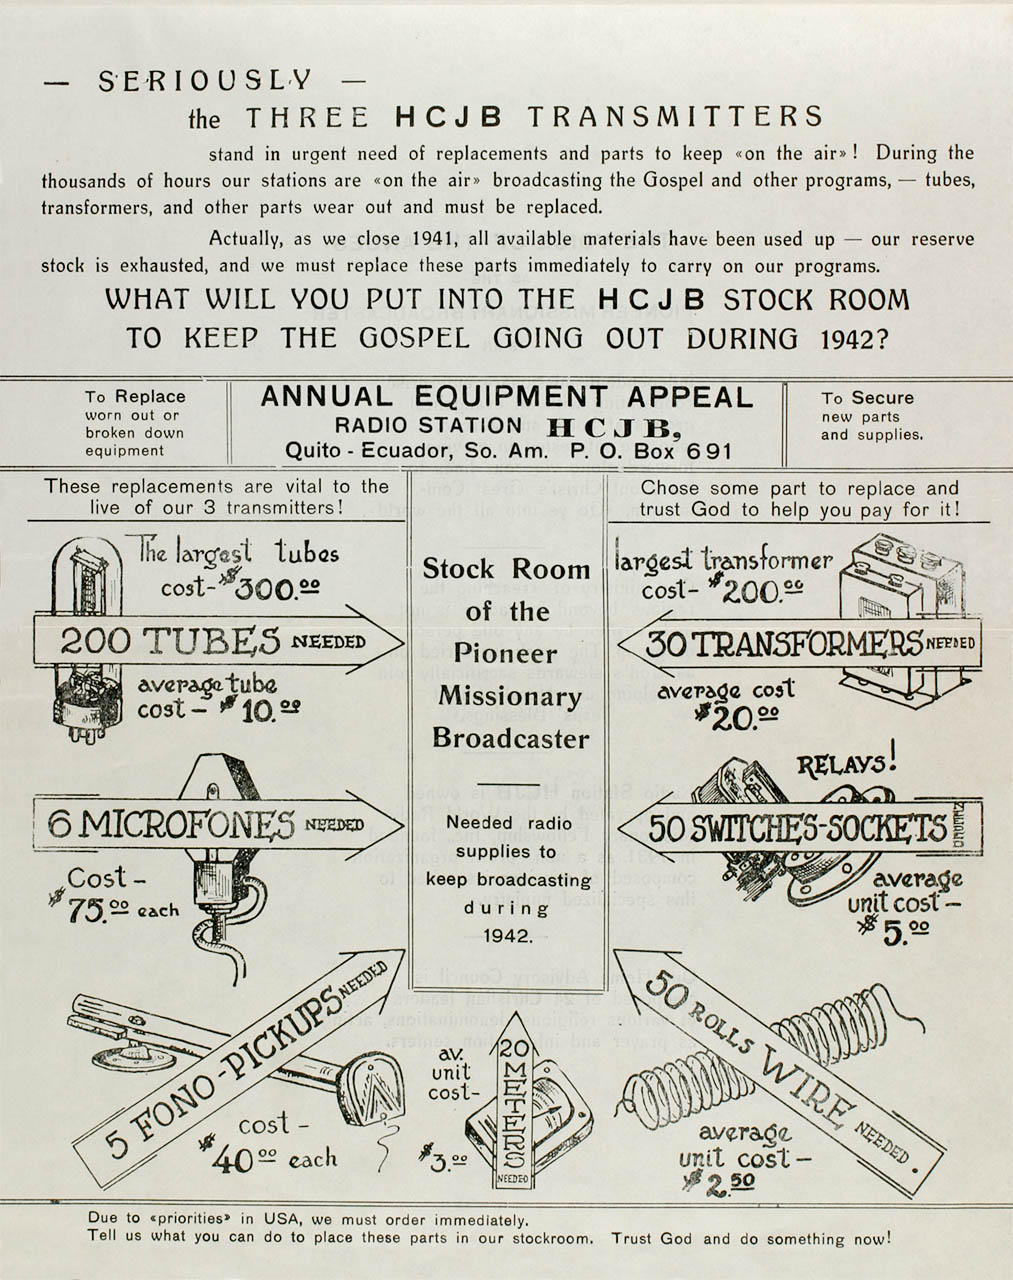 Radio Station HCJB's Engineering replacement parts requestfor 1942